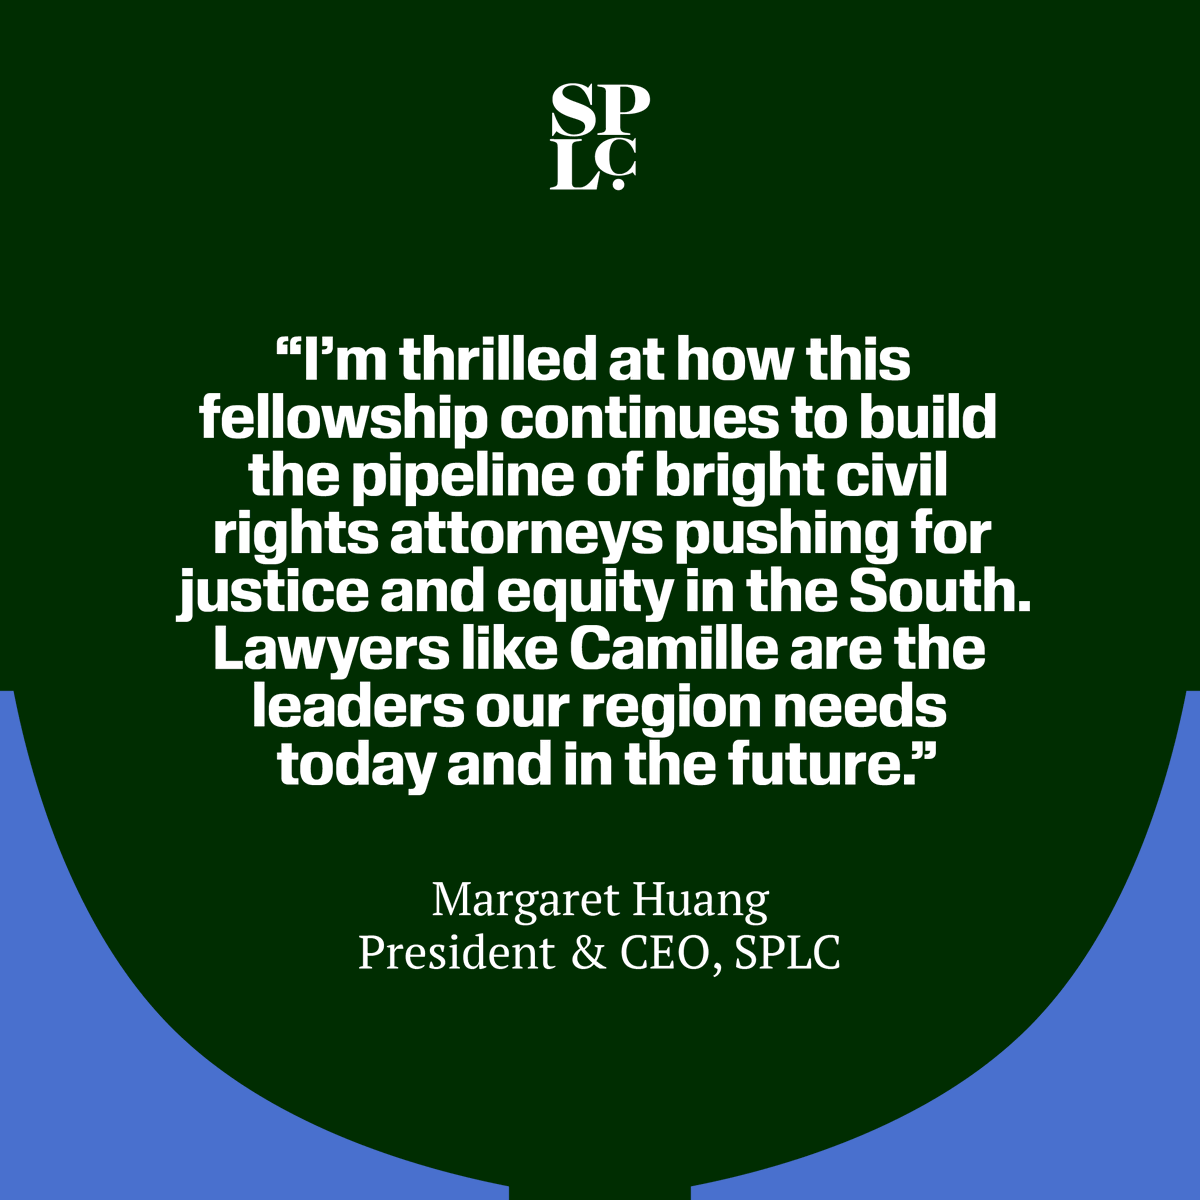 New SPLC fellow Camille Pendley Hau has worked to highlight issues critical to children’s rights. Law and policy, she said, became tools she could use to create change. Read more: bit.ly/4bwkvNo #ChildrensRights #WeekendRead